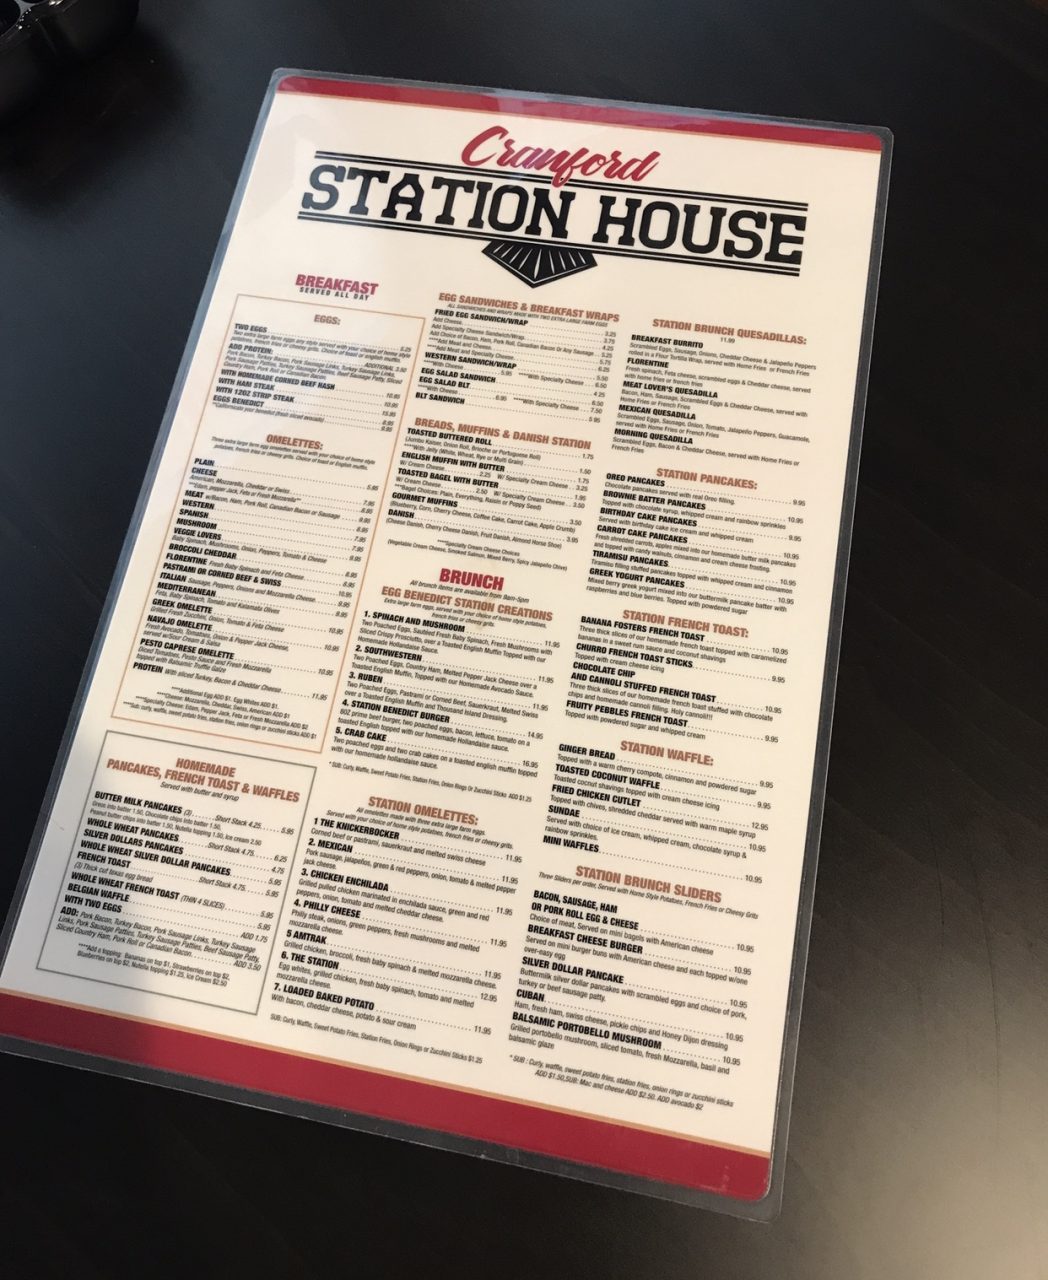 Cranford Station House, The Cranford Station House Officially Opens on Monday, July 8, 2019!